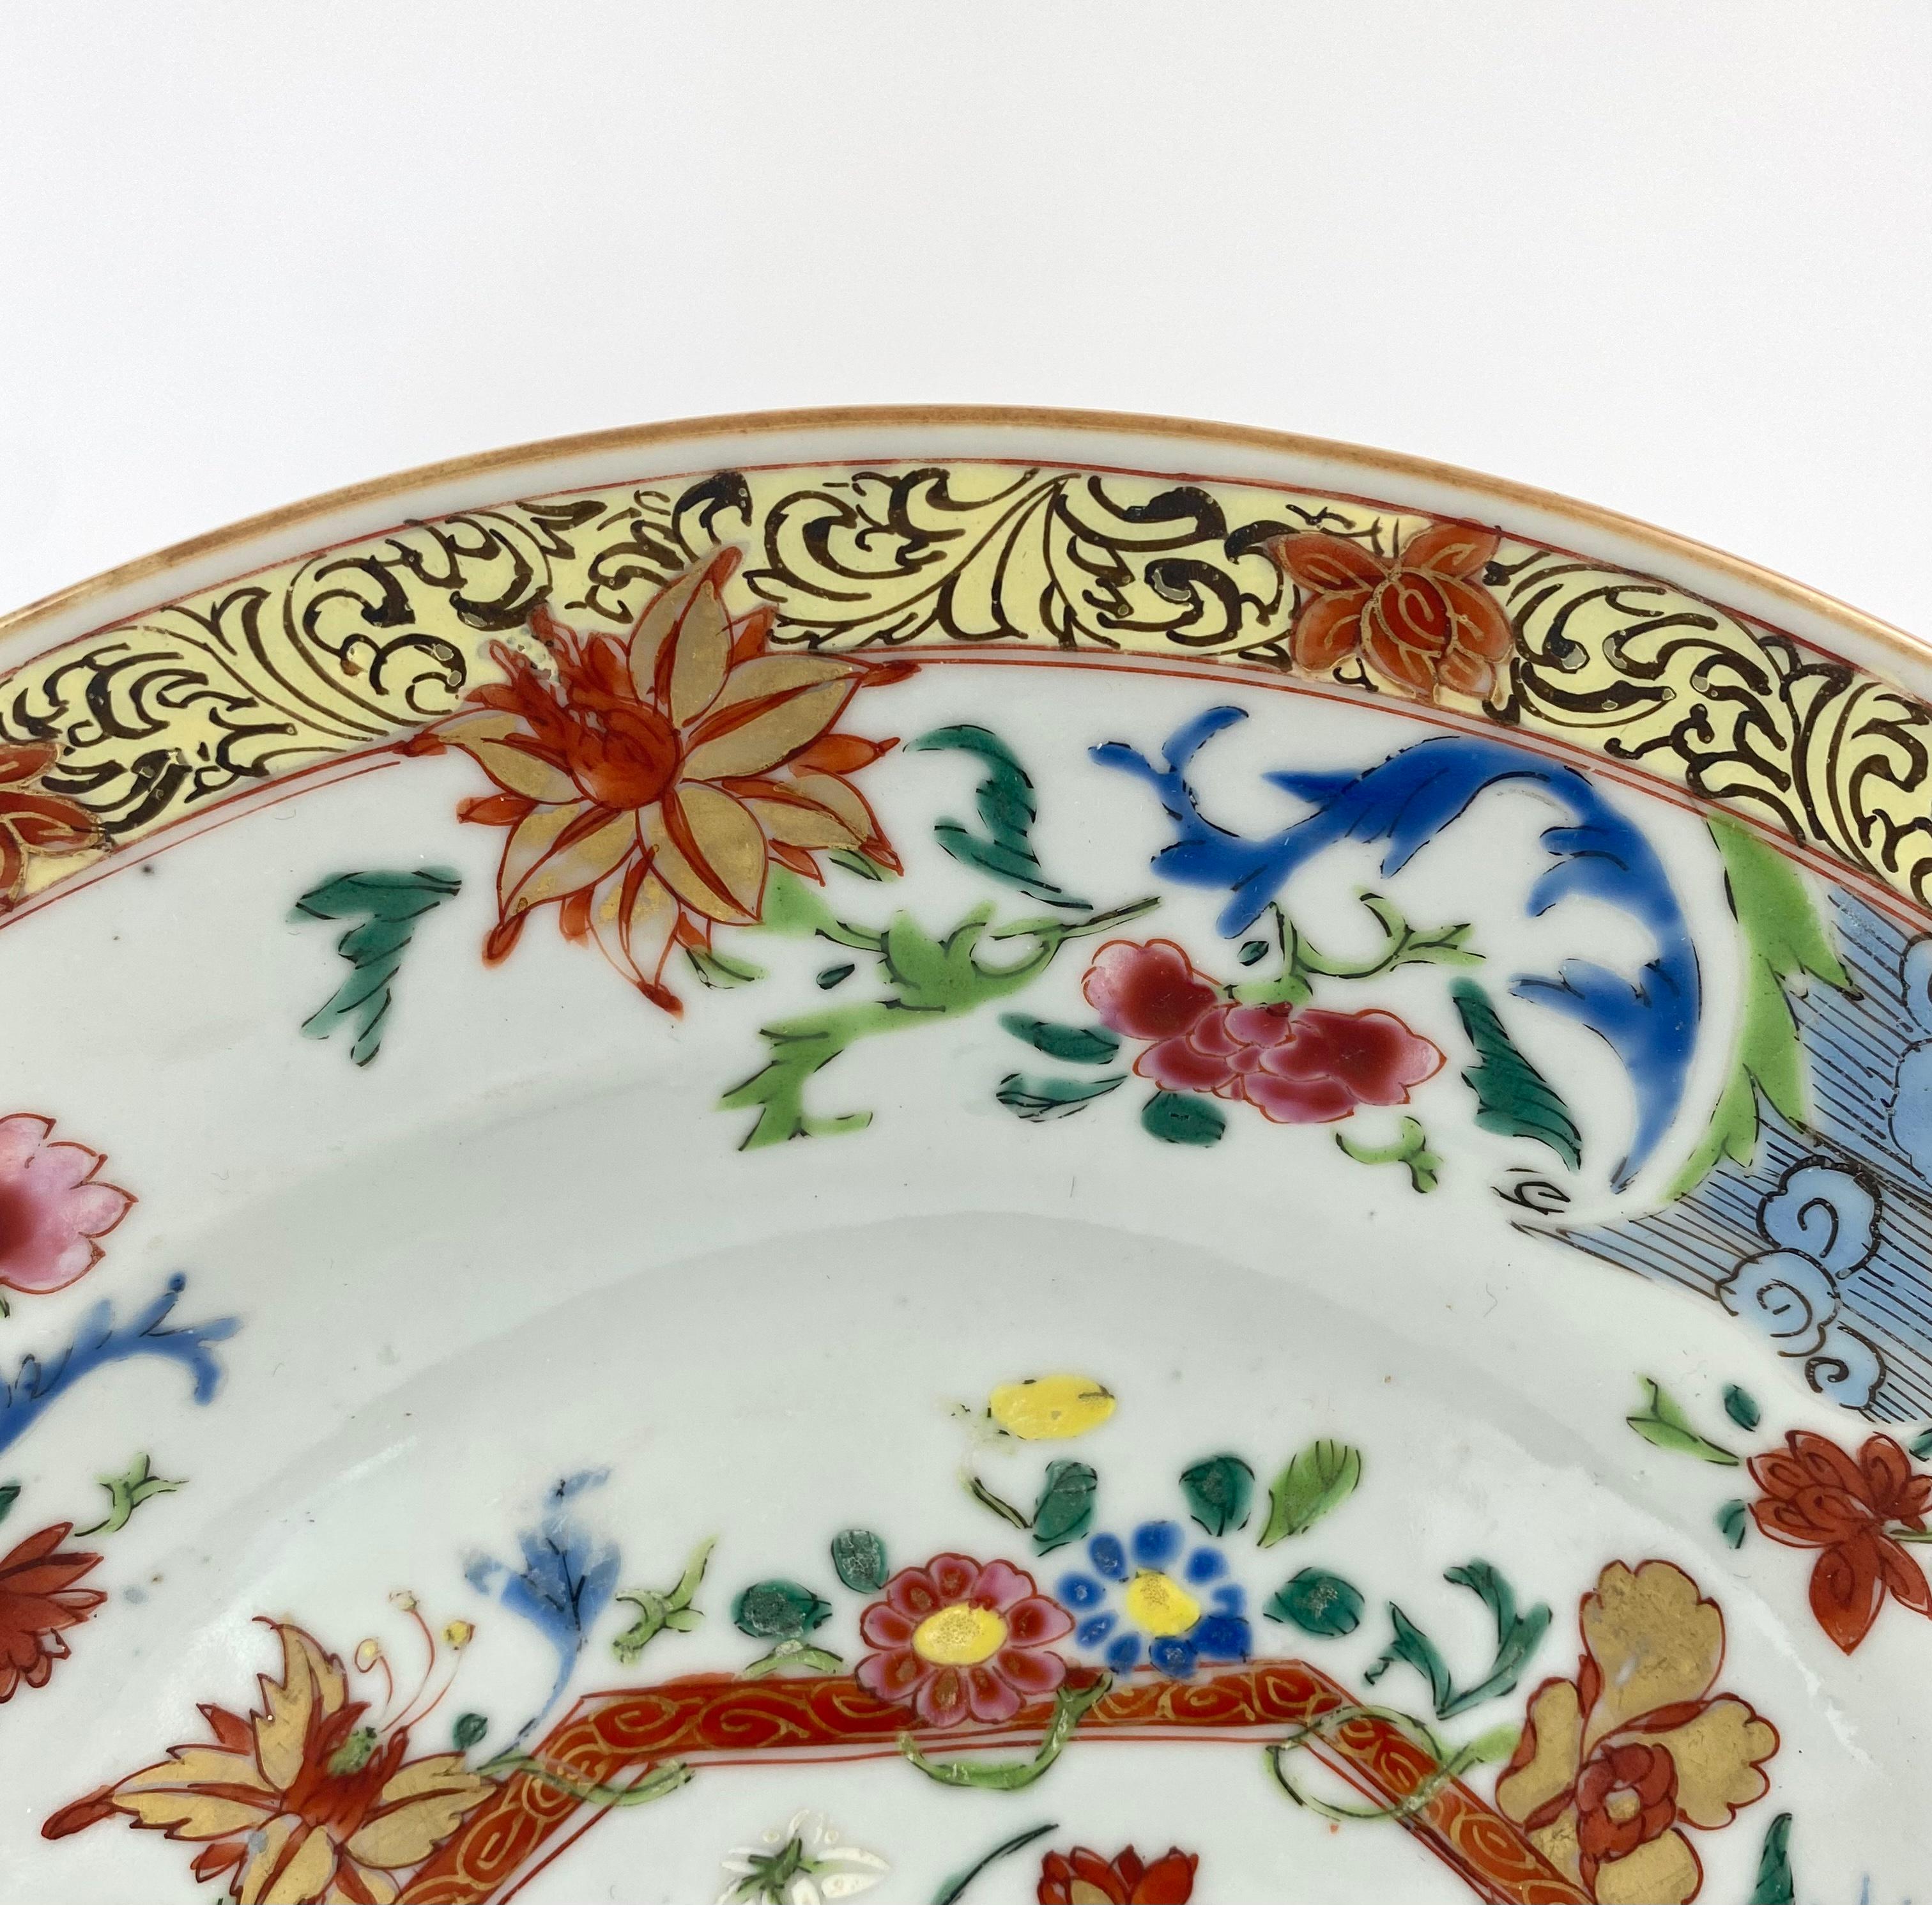 Chinese Export Chinese Porcelain Dish, Famille Rose, c. 1740, Qianlong Period For Sale